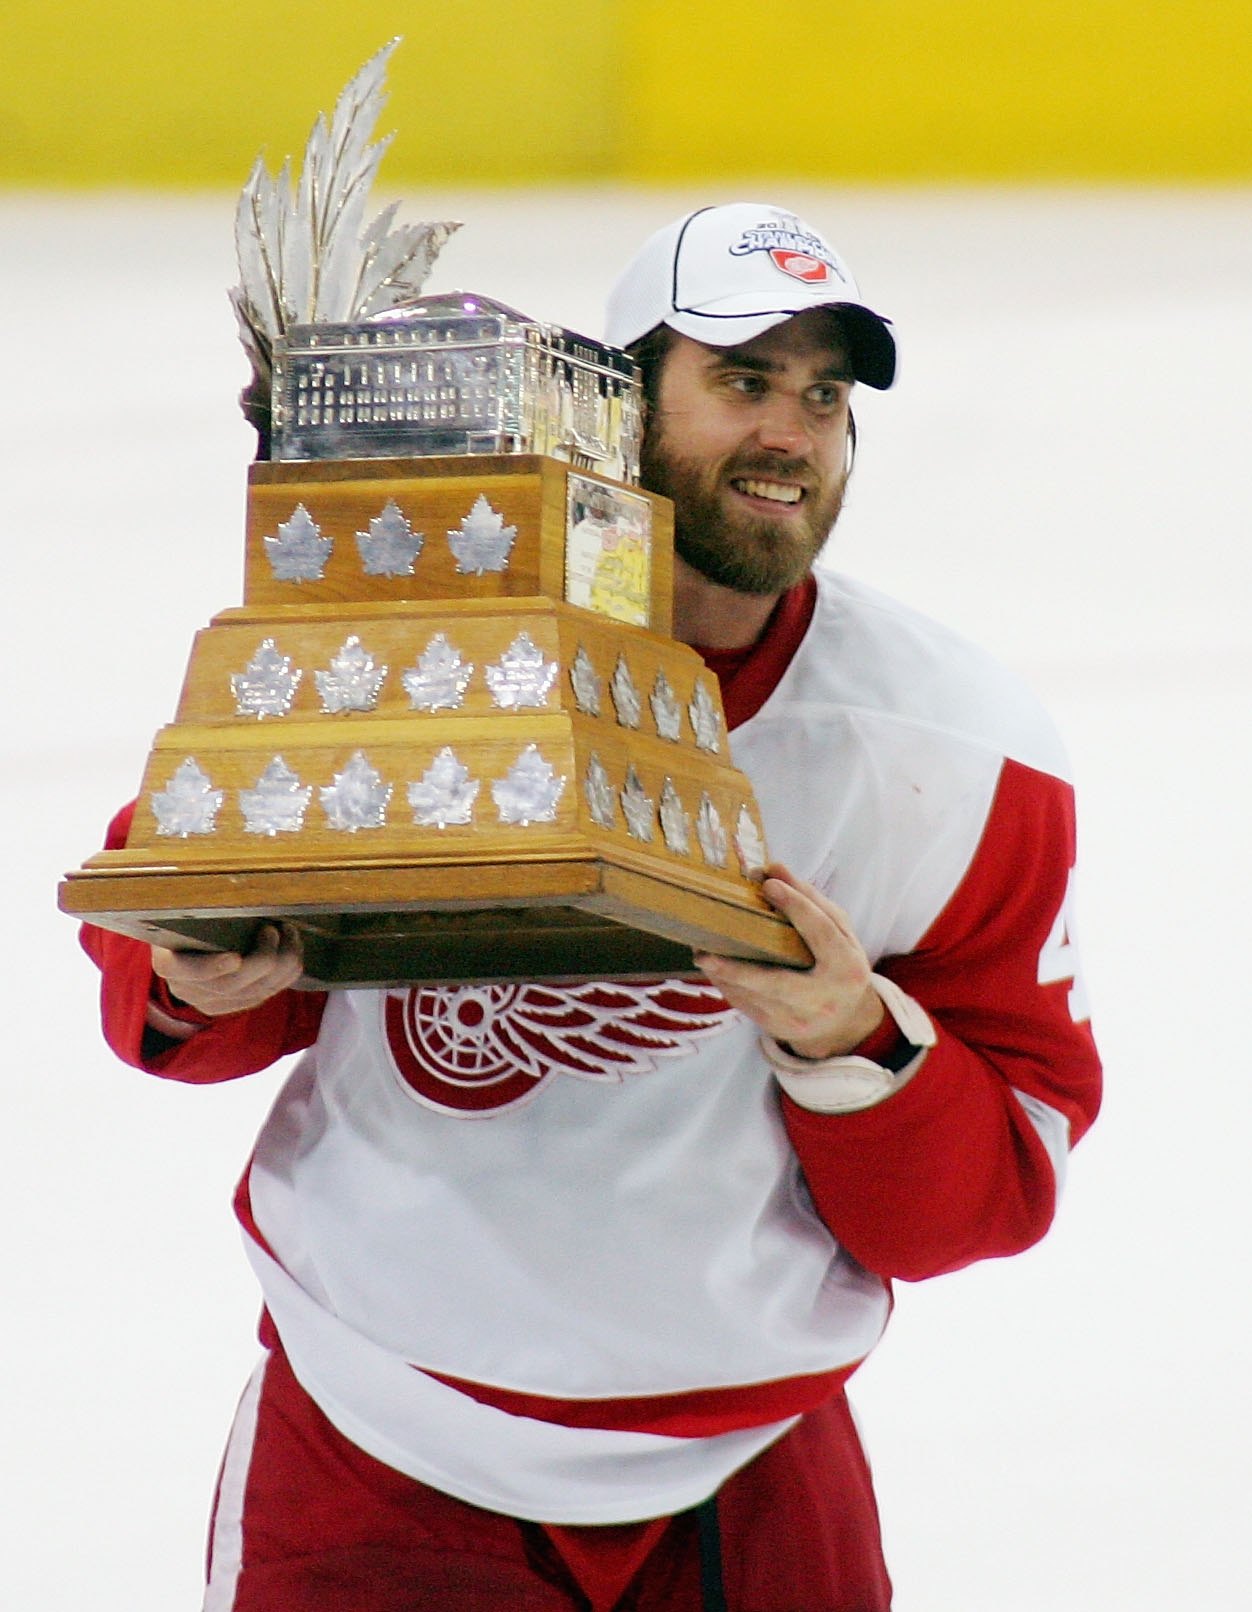 PITTSBURGH - JUNE 04: Stanley Cup Playoff MVP, Henrik Zetterberg #40 of the Detroit Red Wings skates with the Conn Smythe trophy after defeating the Pittsburgh Penguins in game six of the 2008 NHL Stanley Cup Finals at Mellon Arena on June 4, 2008 in Pitt